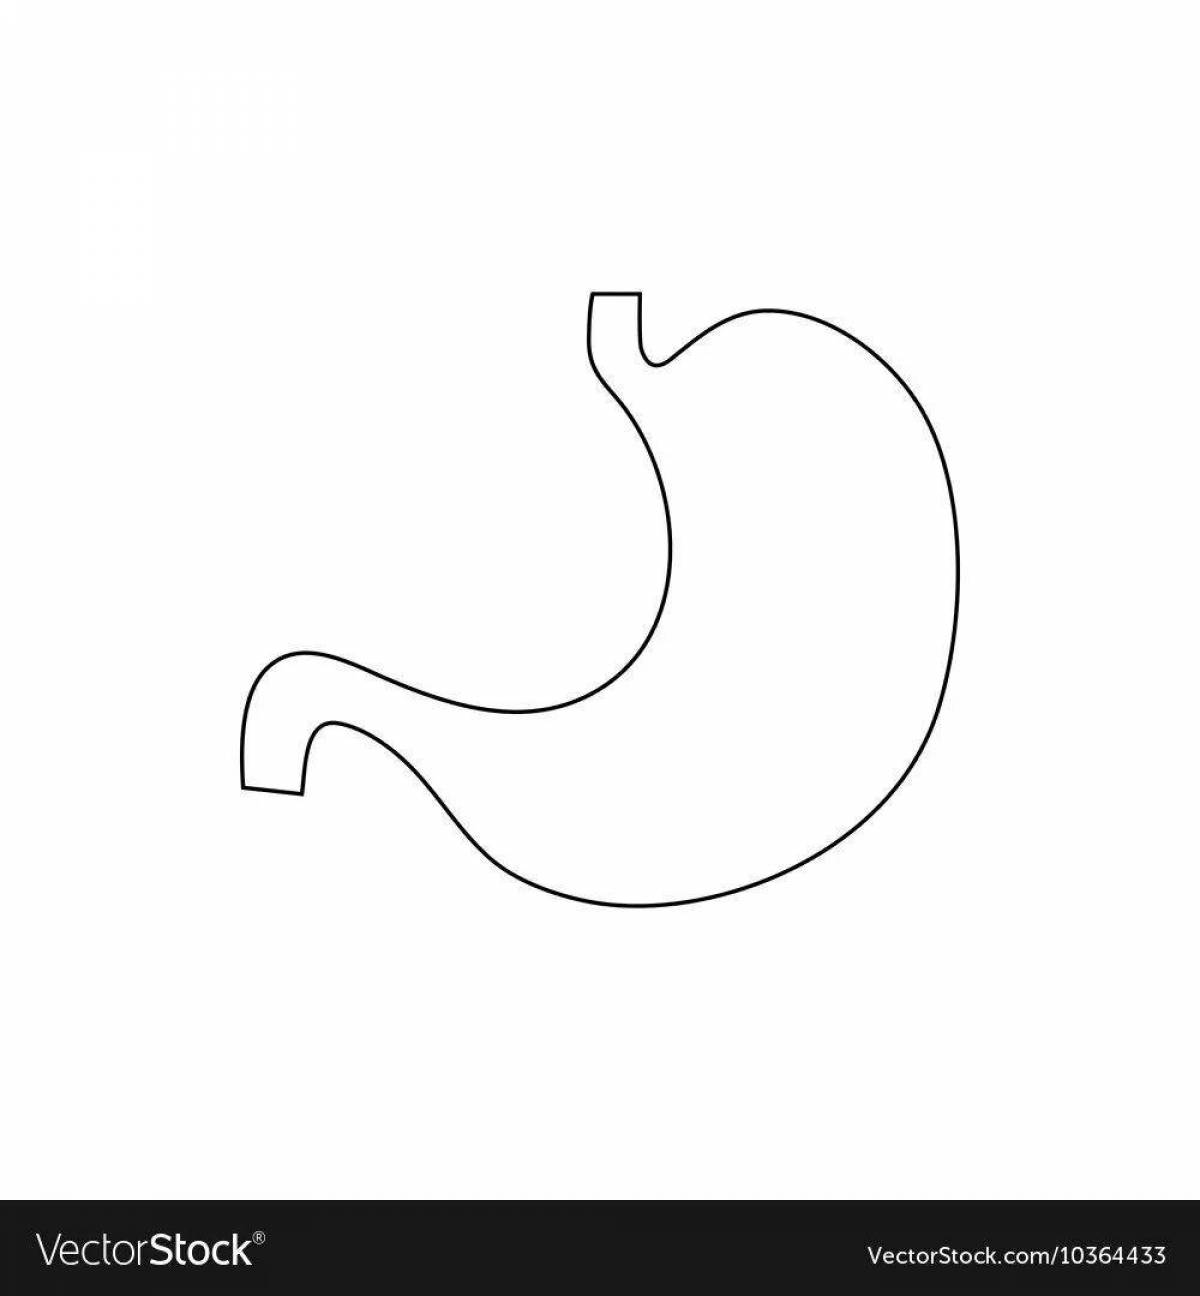 Adorable stomach coloring page